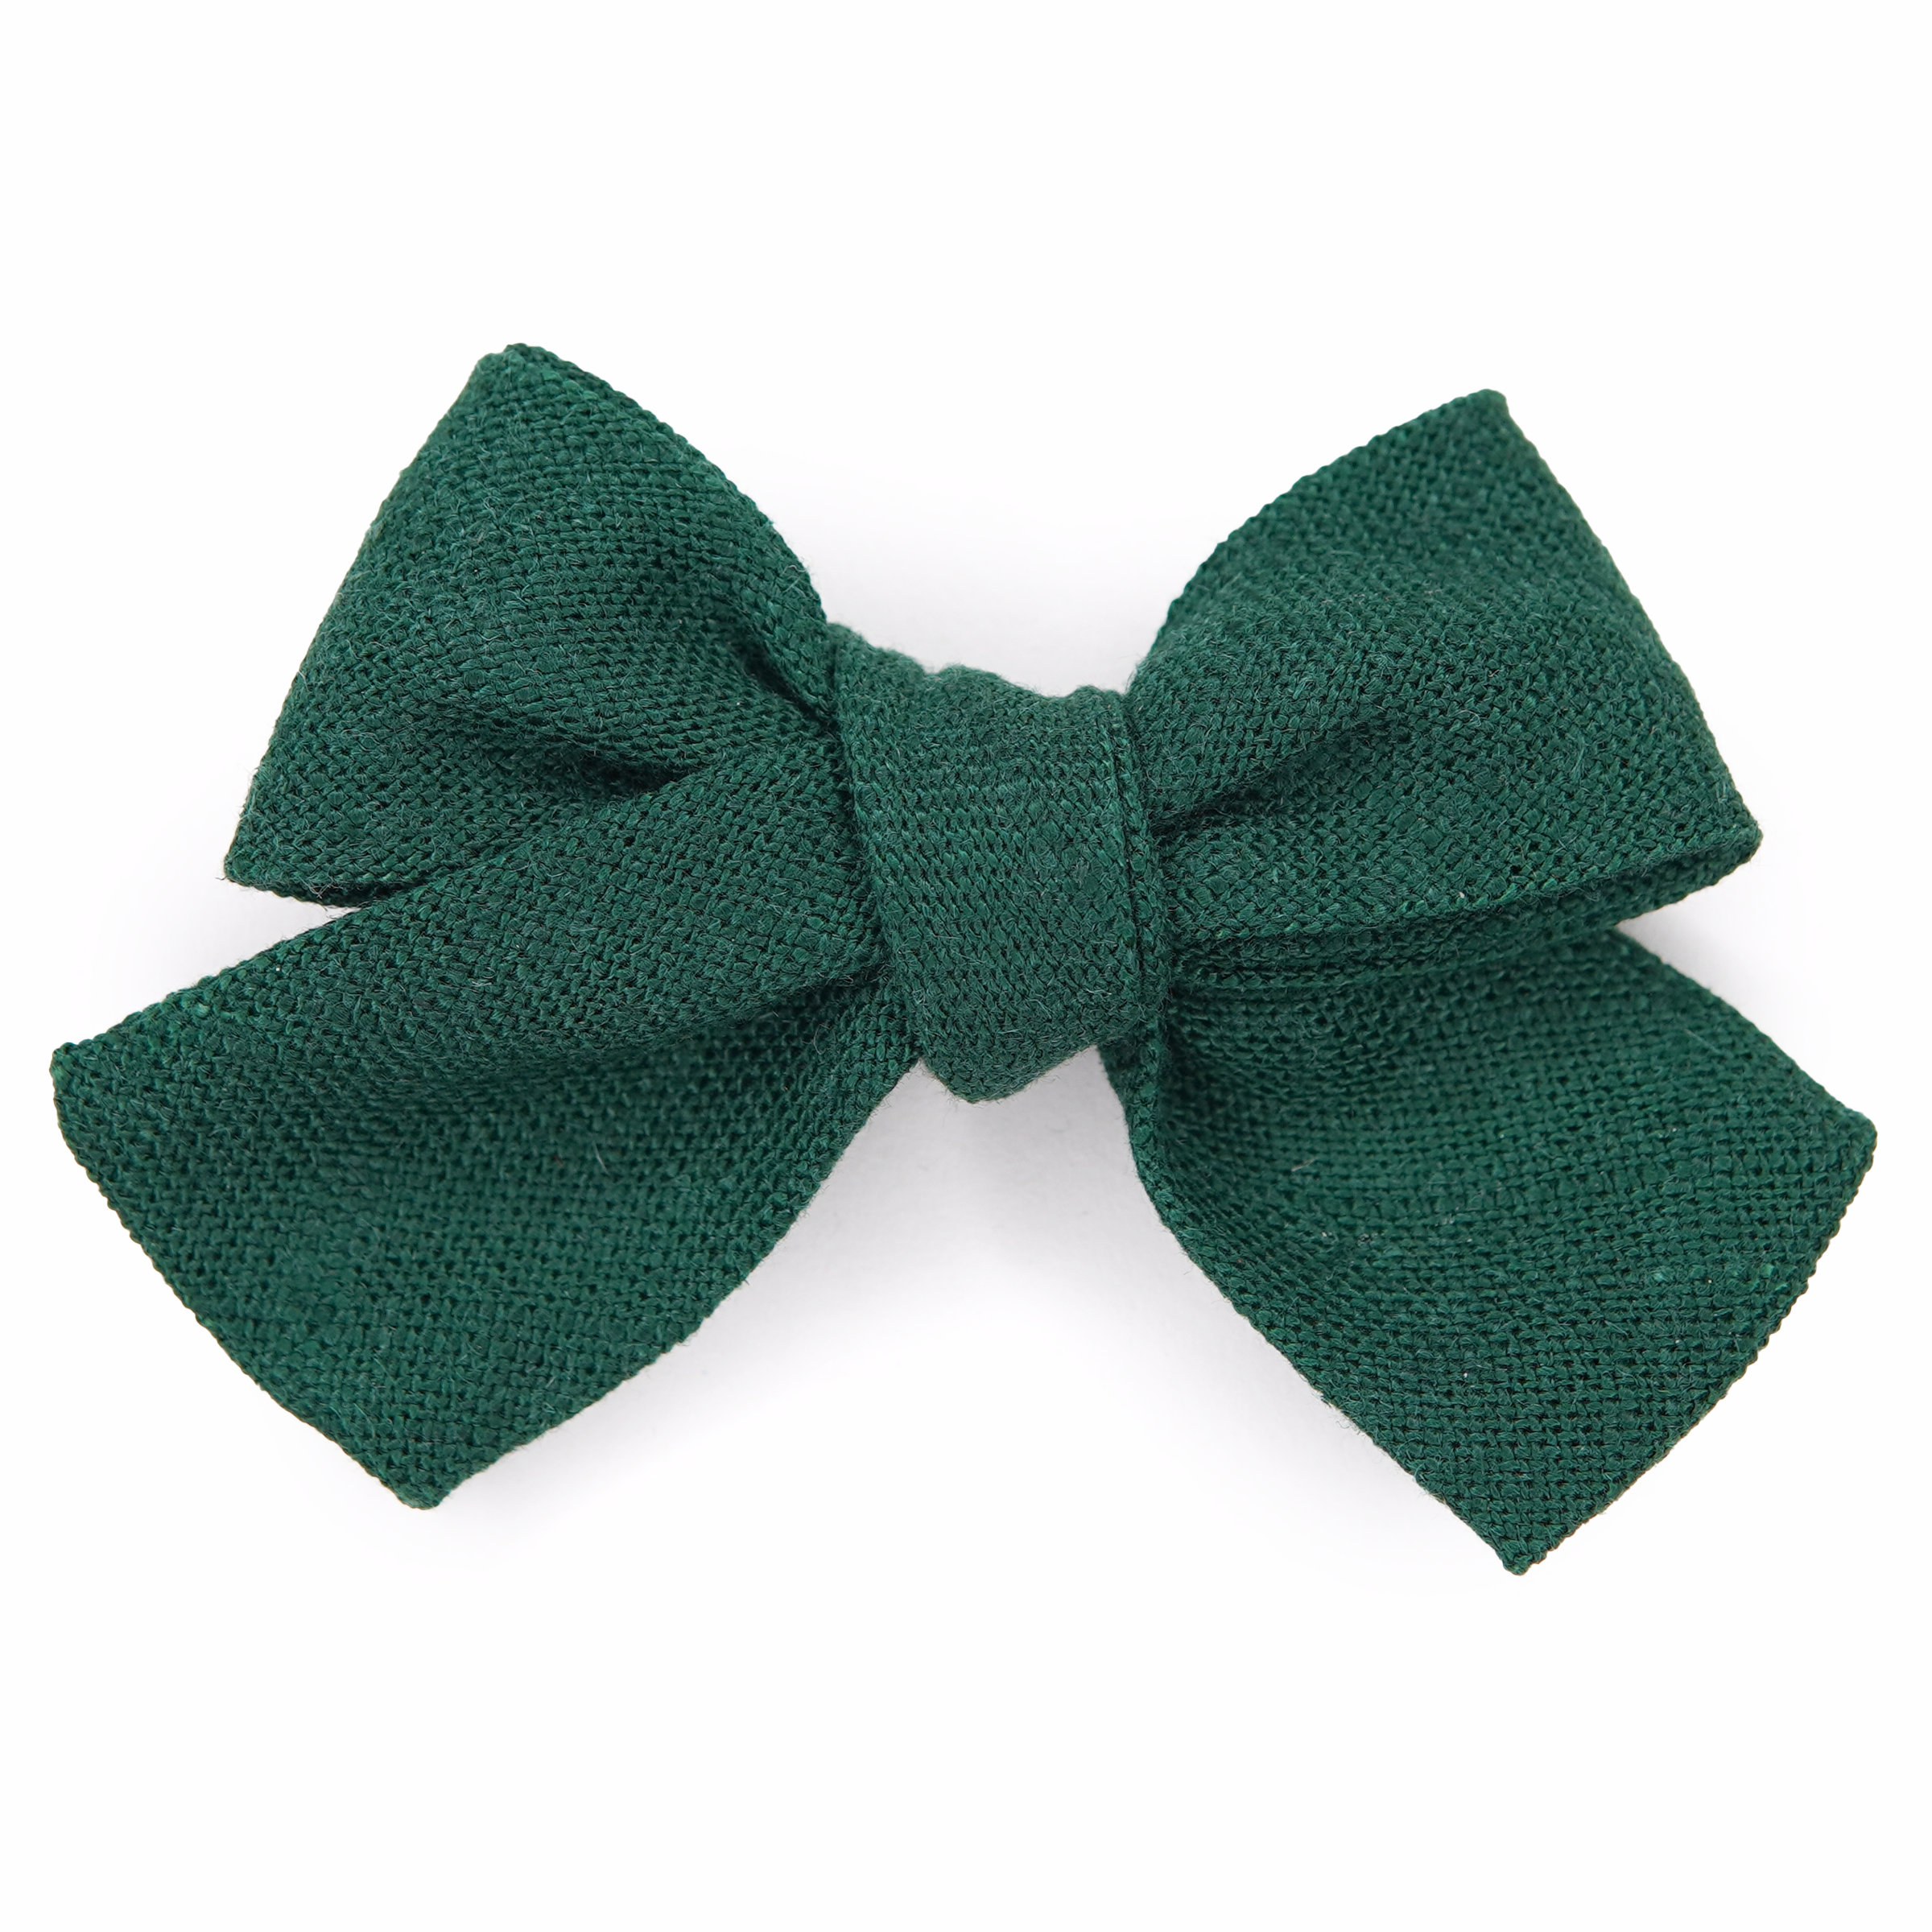 Evergreen Hair Bow for Girls - Small